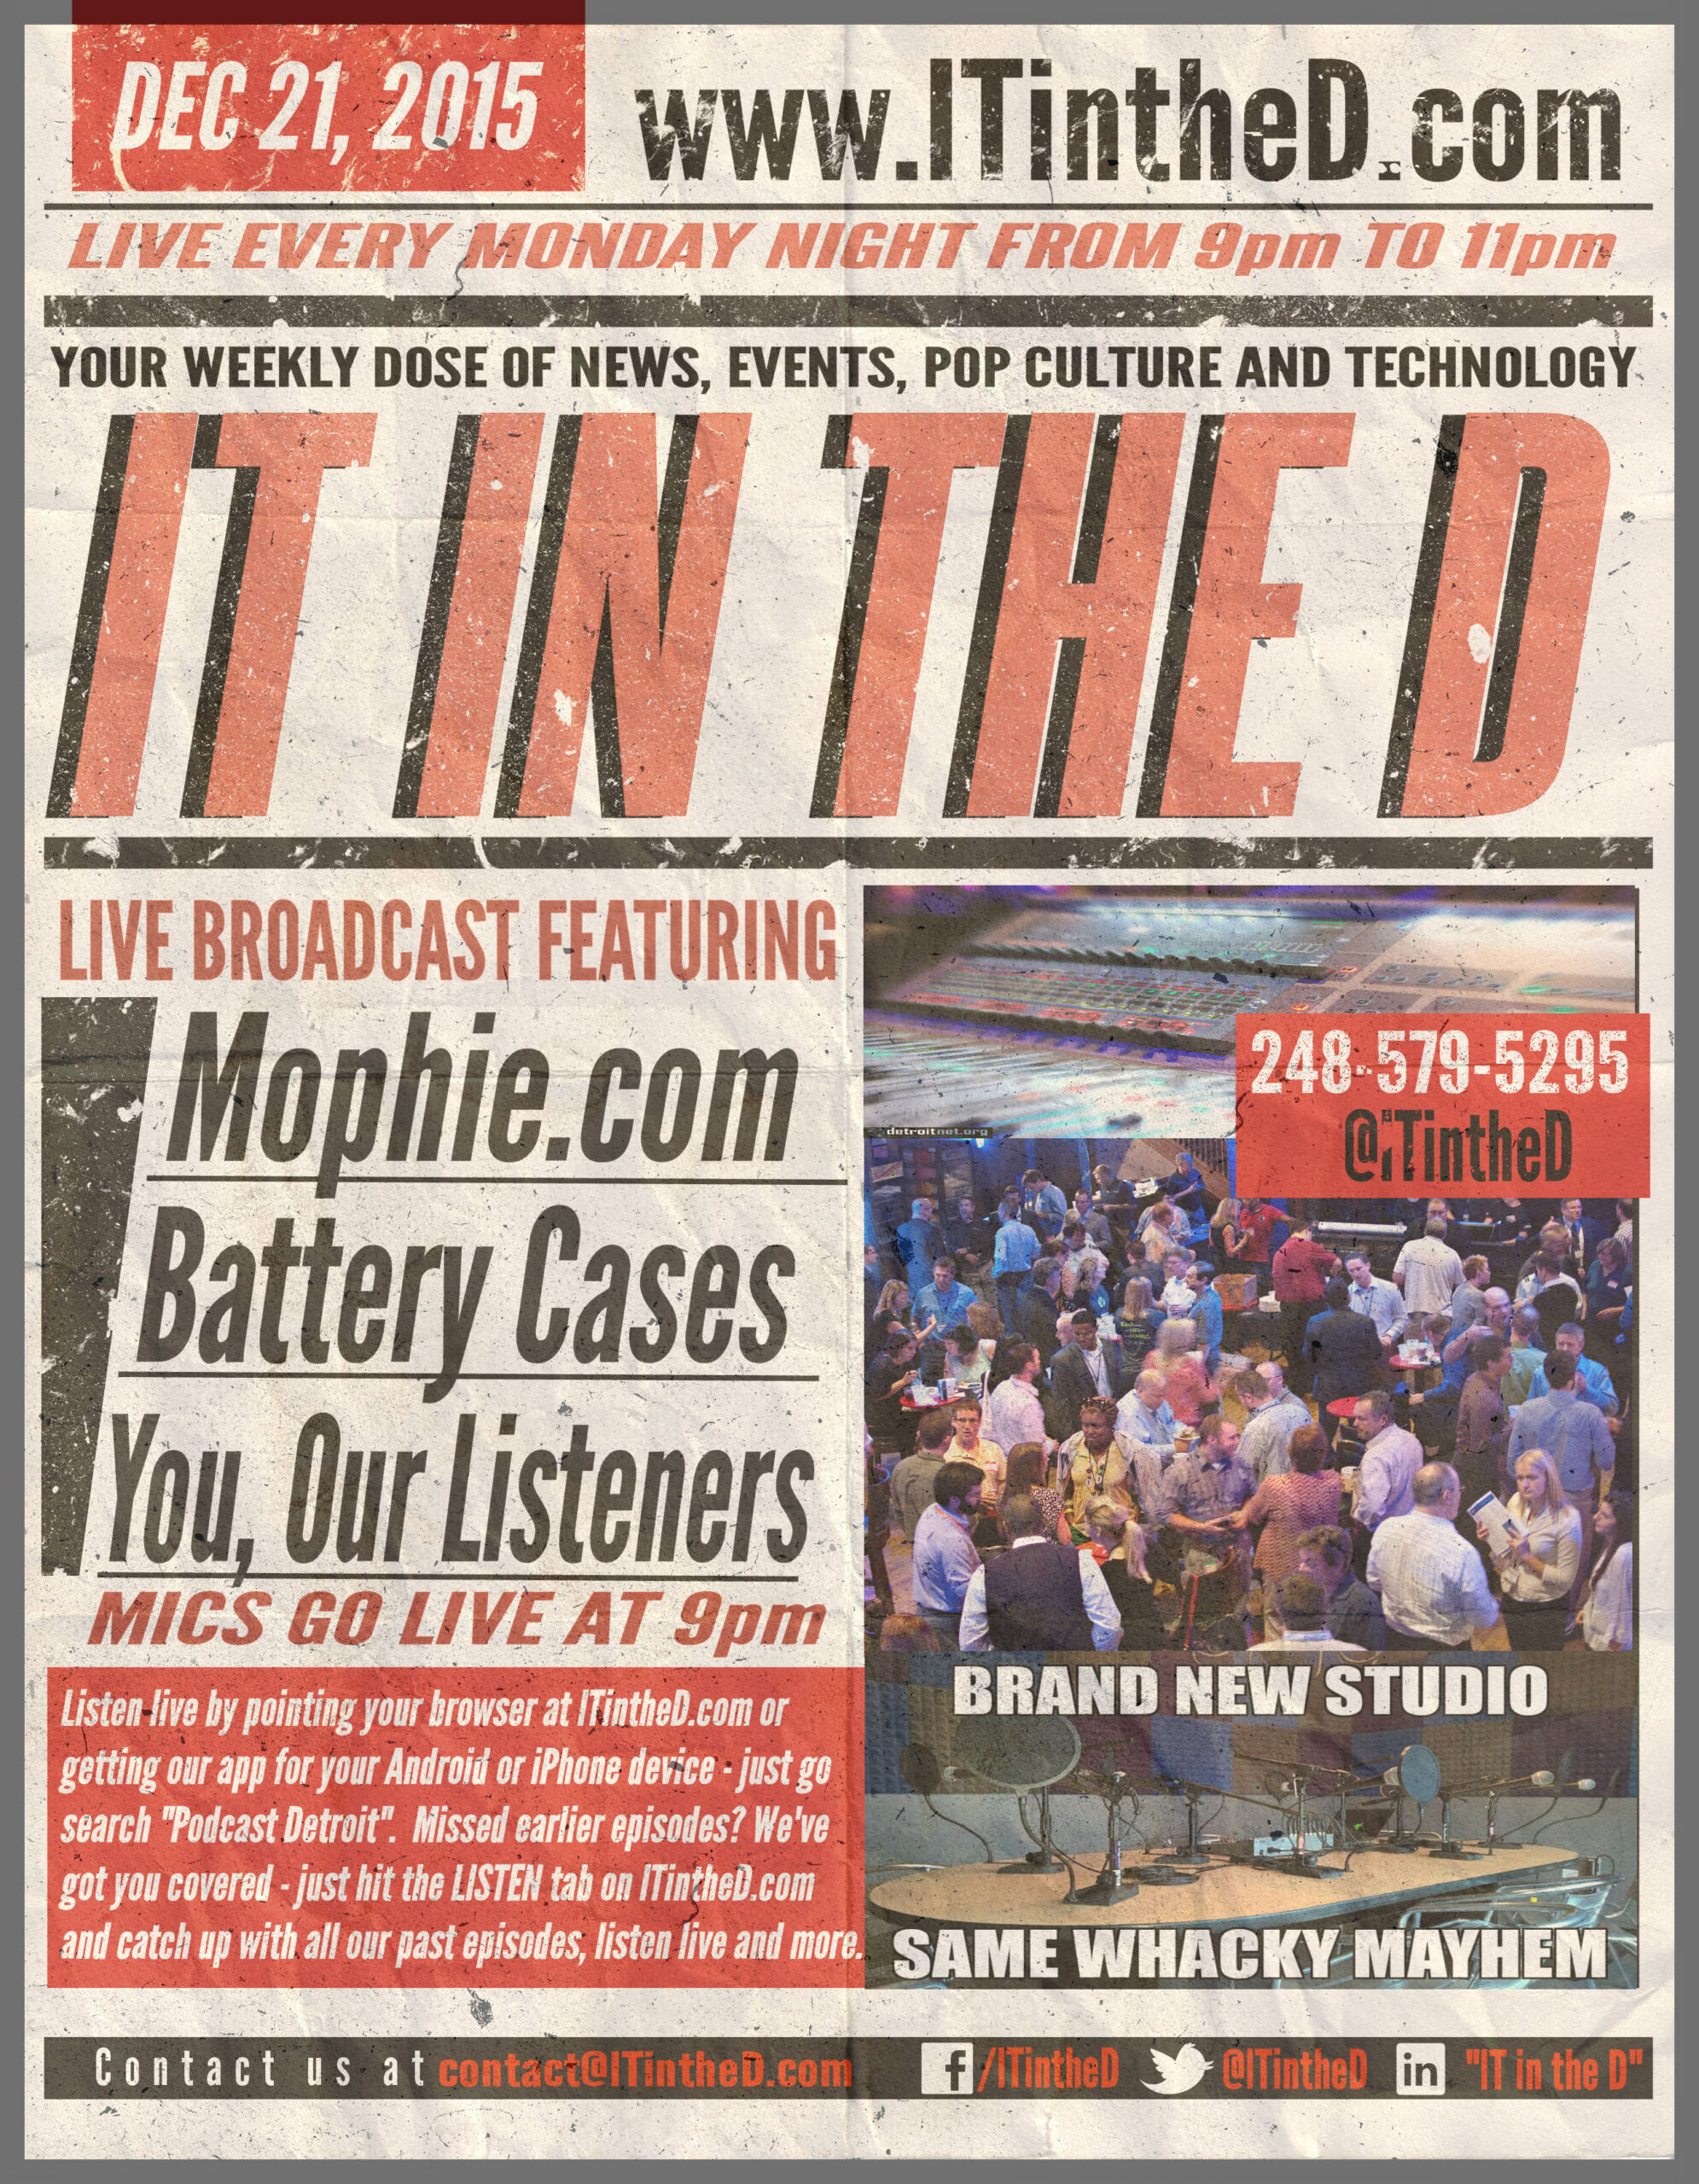 Mophie In-Studio Tonight, Charity Event Recap, 2016 Events and More for 12/21/2015